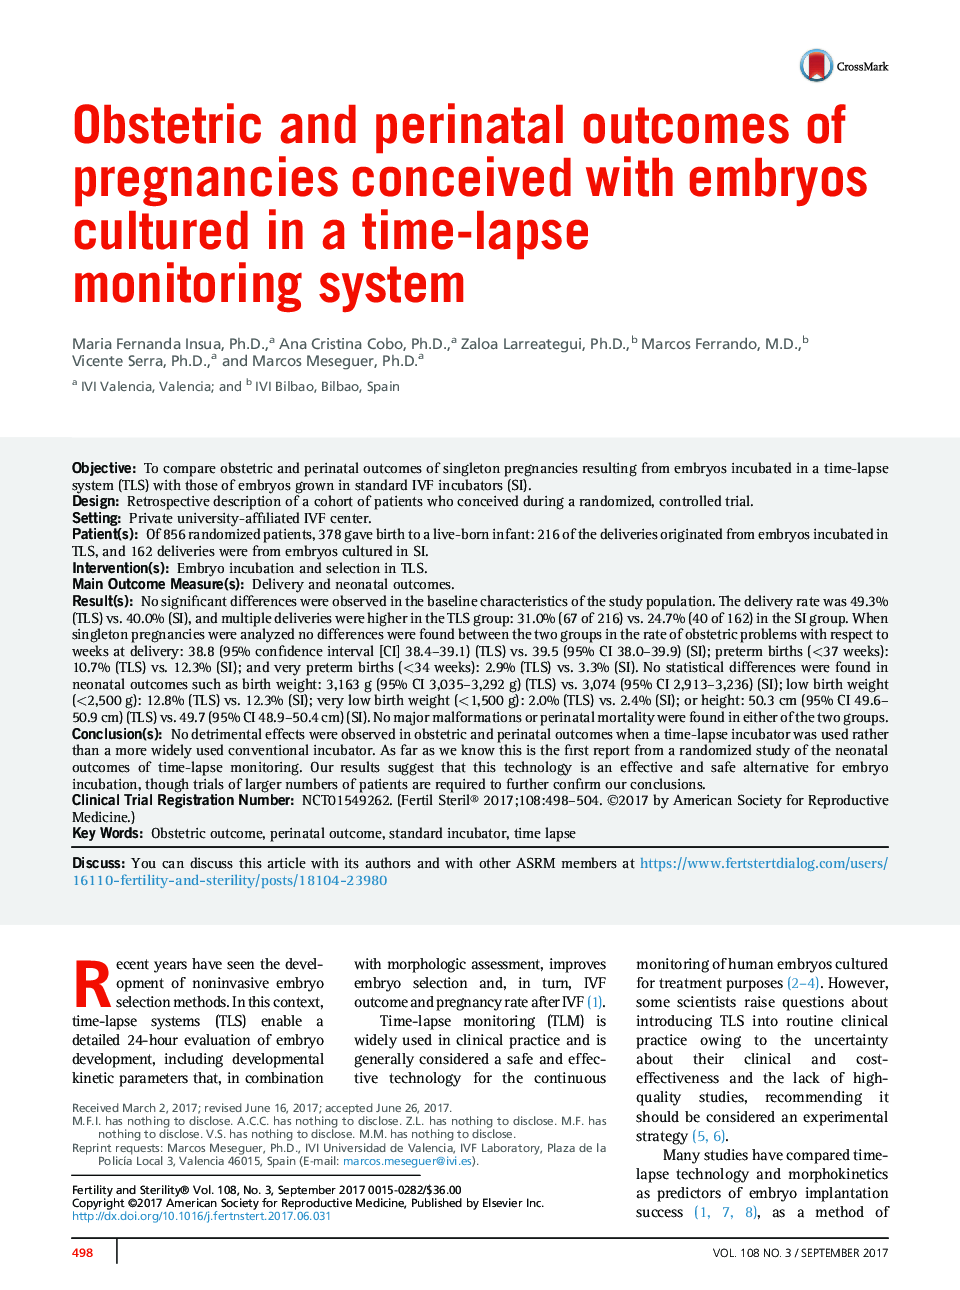 Obstetric and perinatal outcomes of pregnancies conceived with embryos cultured in a time-lapse monitoring system